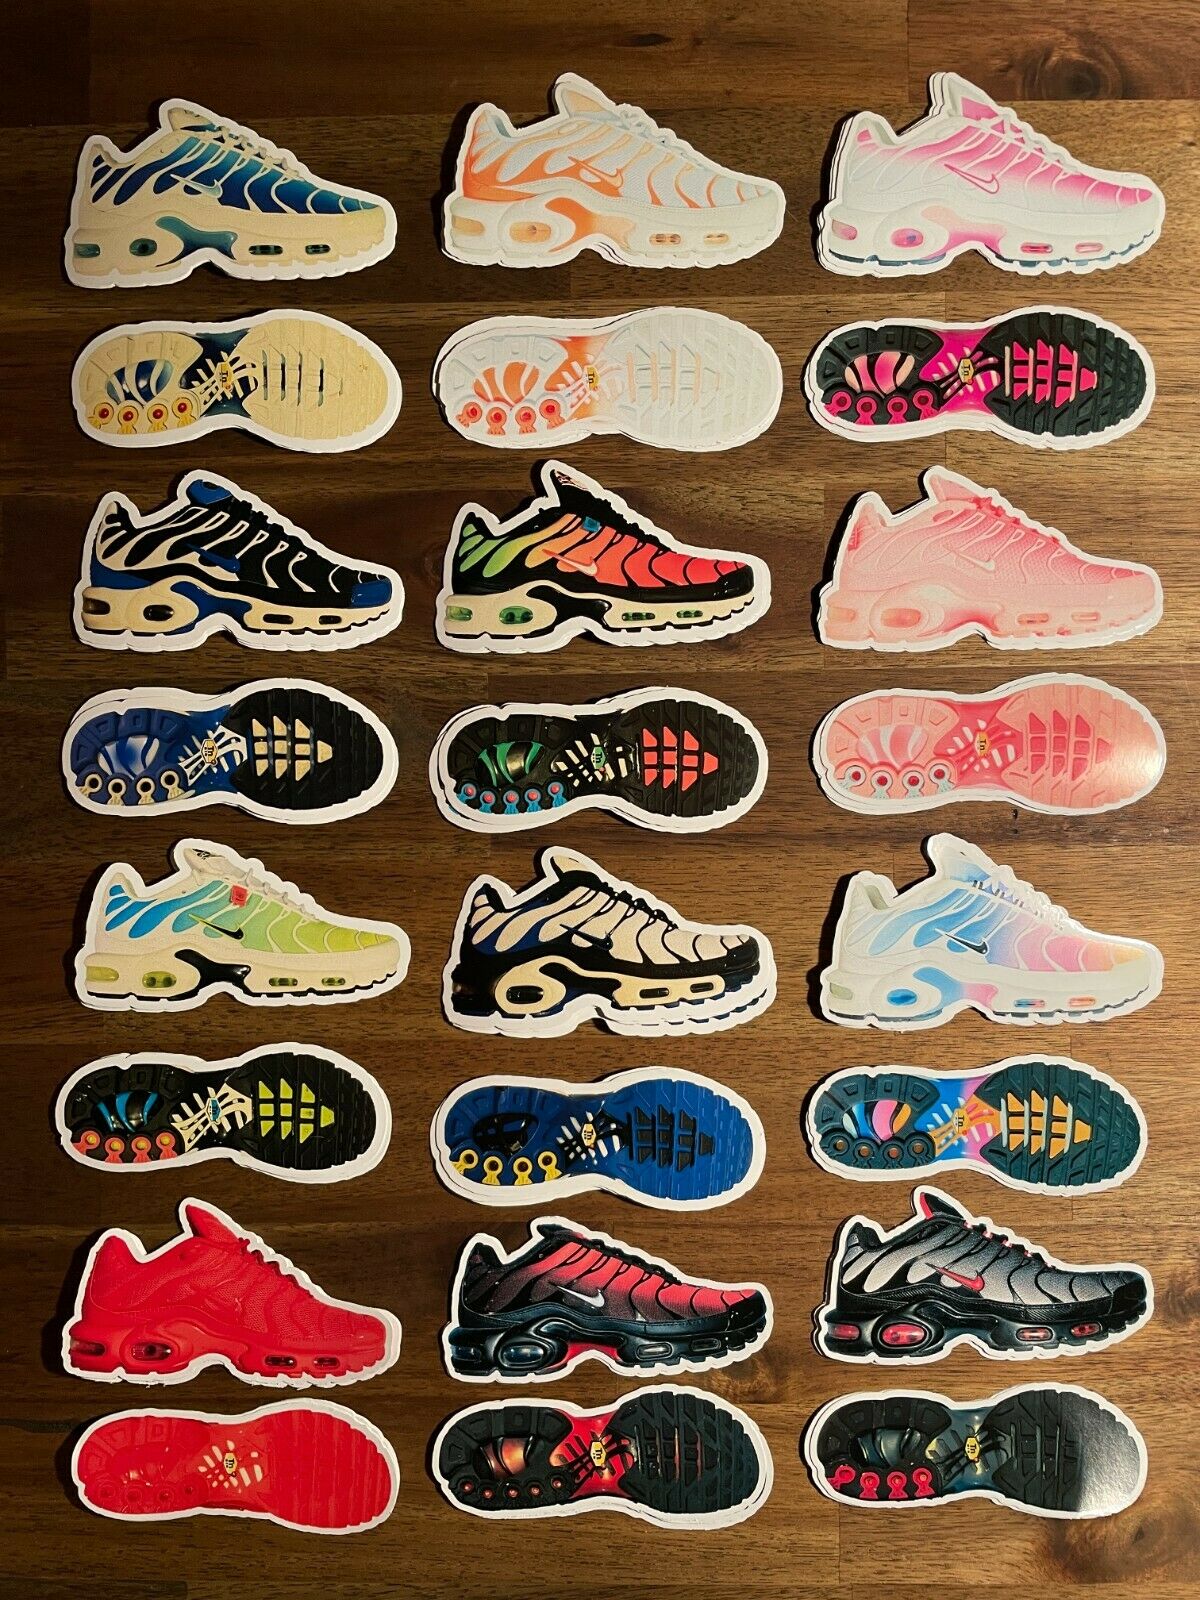 Nike Tn Tuned Air Max Shoe Stickers - 100mm 24x Sticker Pack VOLUME DISCOUNTS